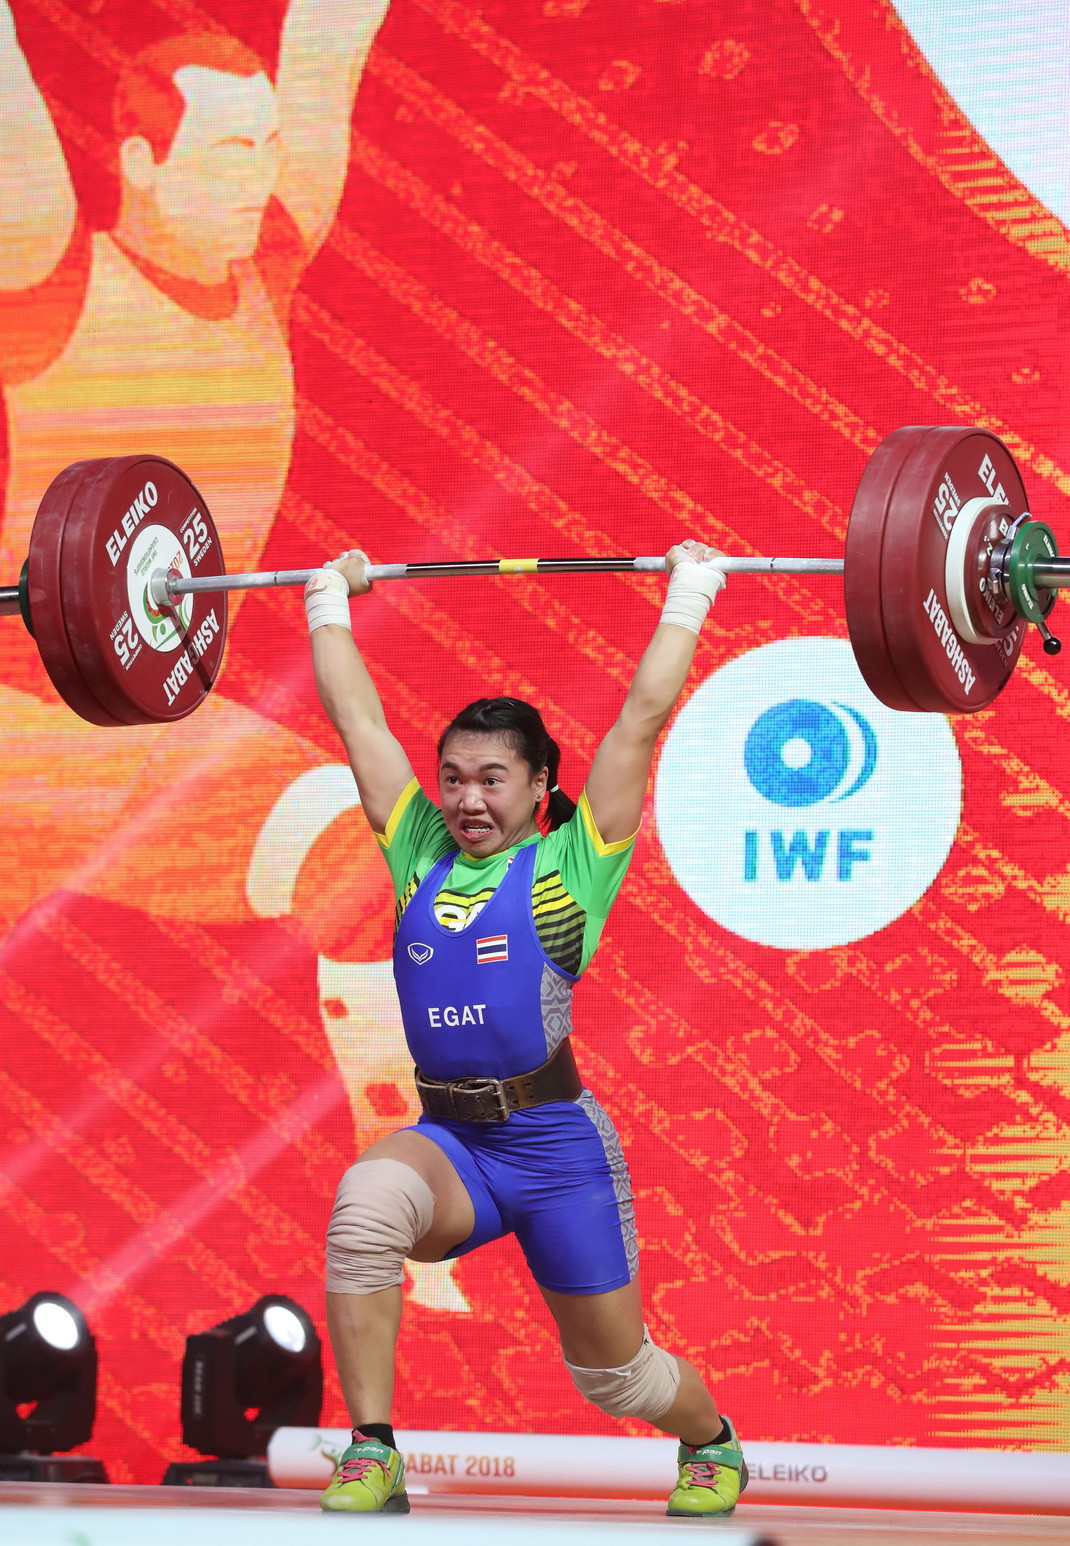 They switched positions in the clean and jerk with Wamalun, pictured, second and Rim third ©IWF